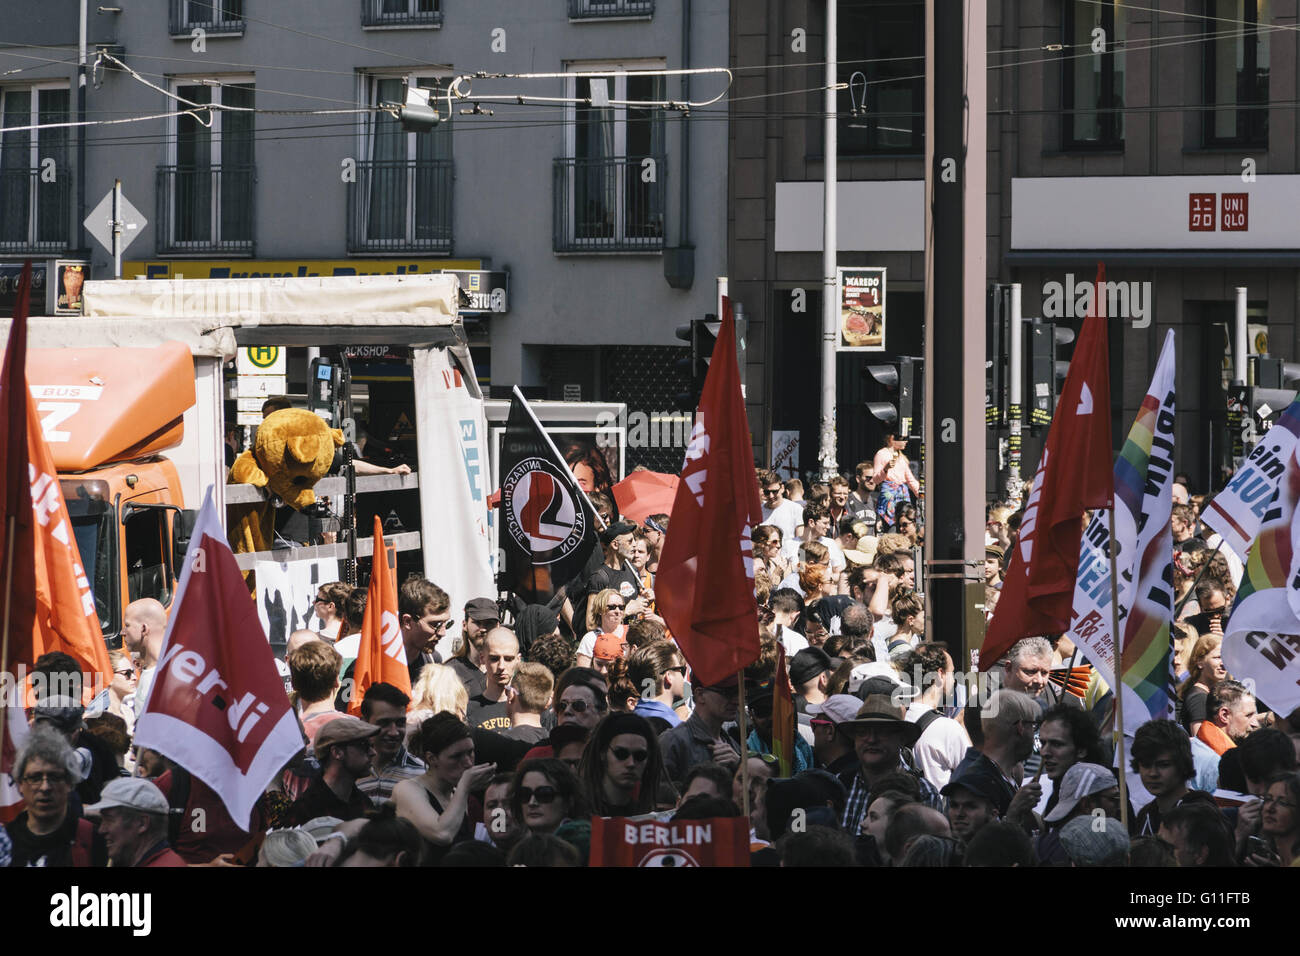 Berlin, Berlin, Germany. 7th May, 2016. Protesters gather at Hackescher Markt during the counter protests against the rally held under the motto 'Merkel muss weg![Merkel must go]' organised by far-right group 'We for Berlin & We for Germany' Credit:  Jan Scheunert/ZUMA Wire/Alamy Live News Stock Photo